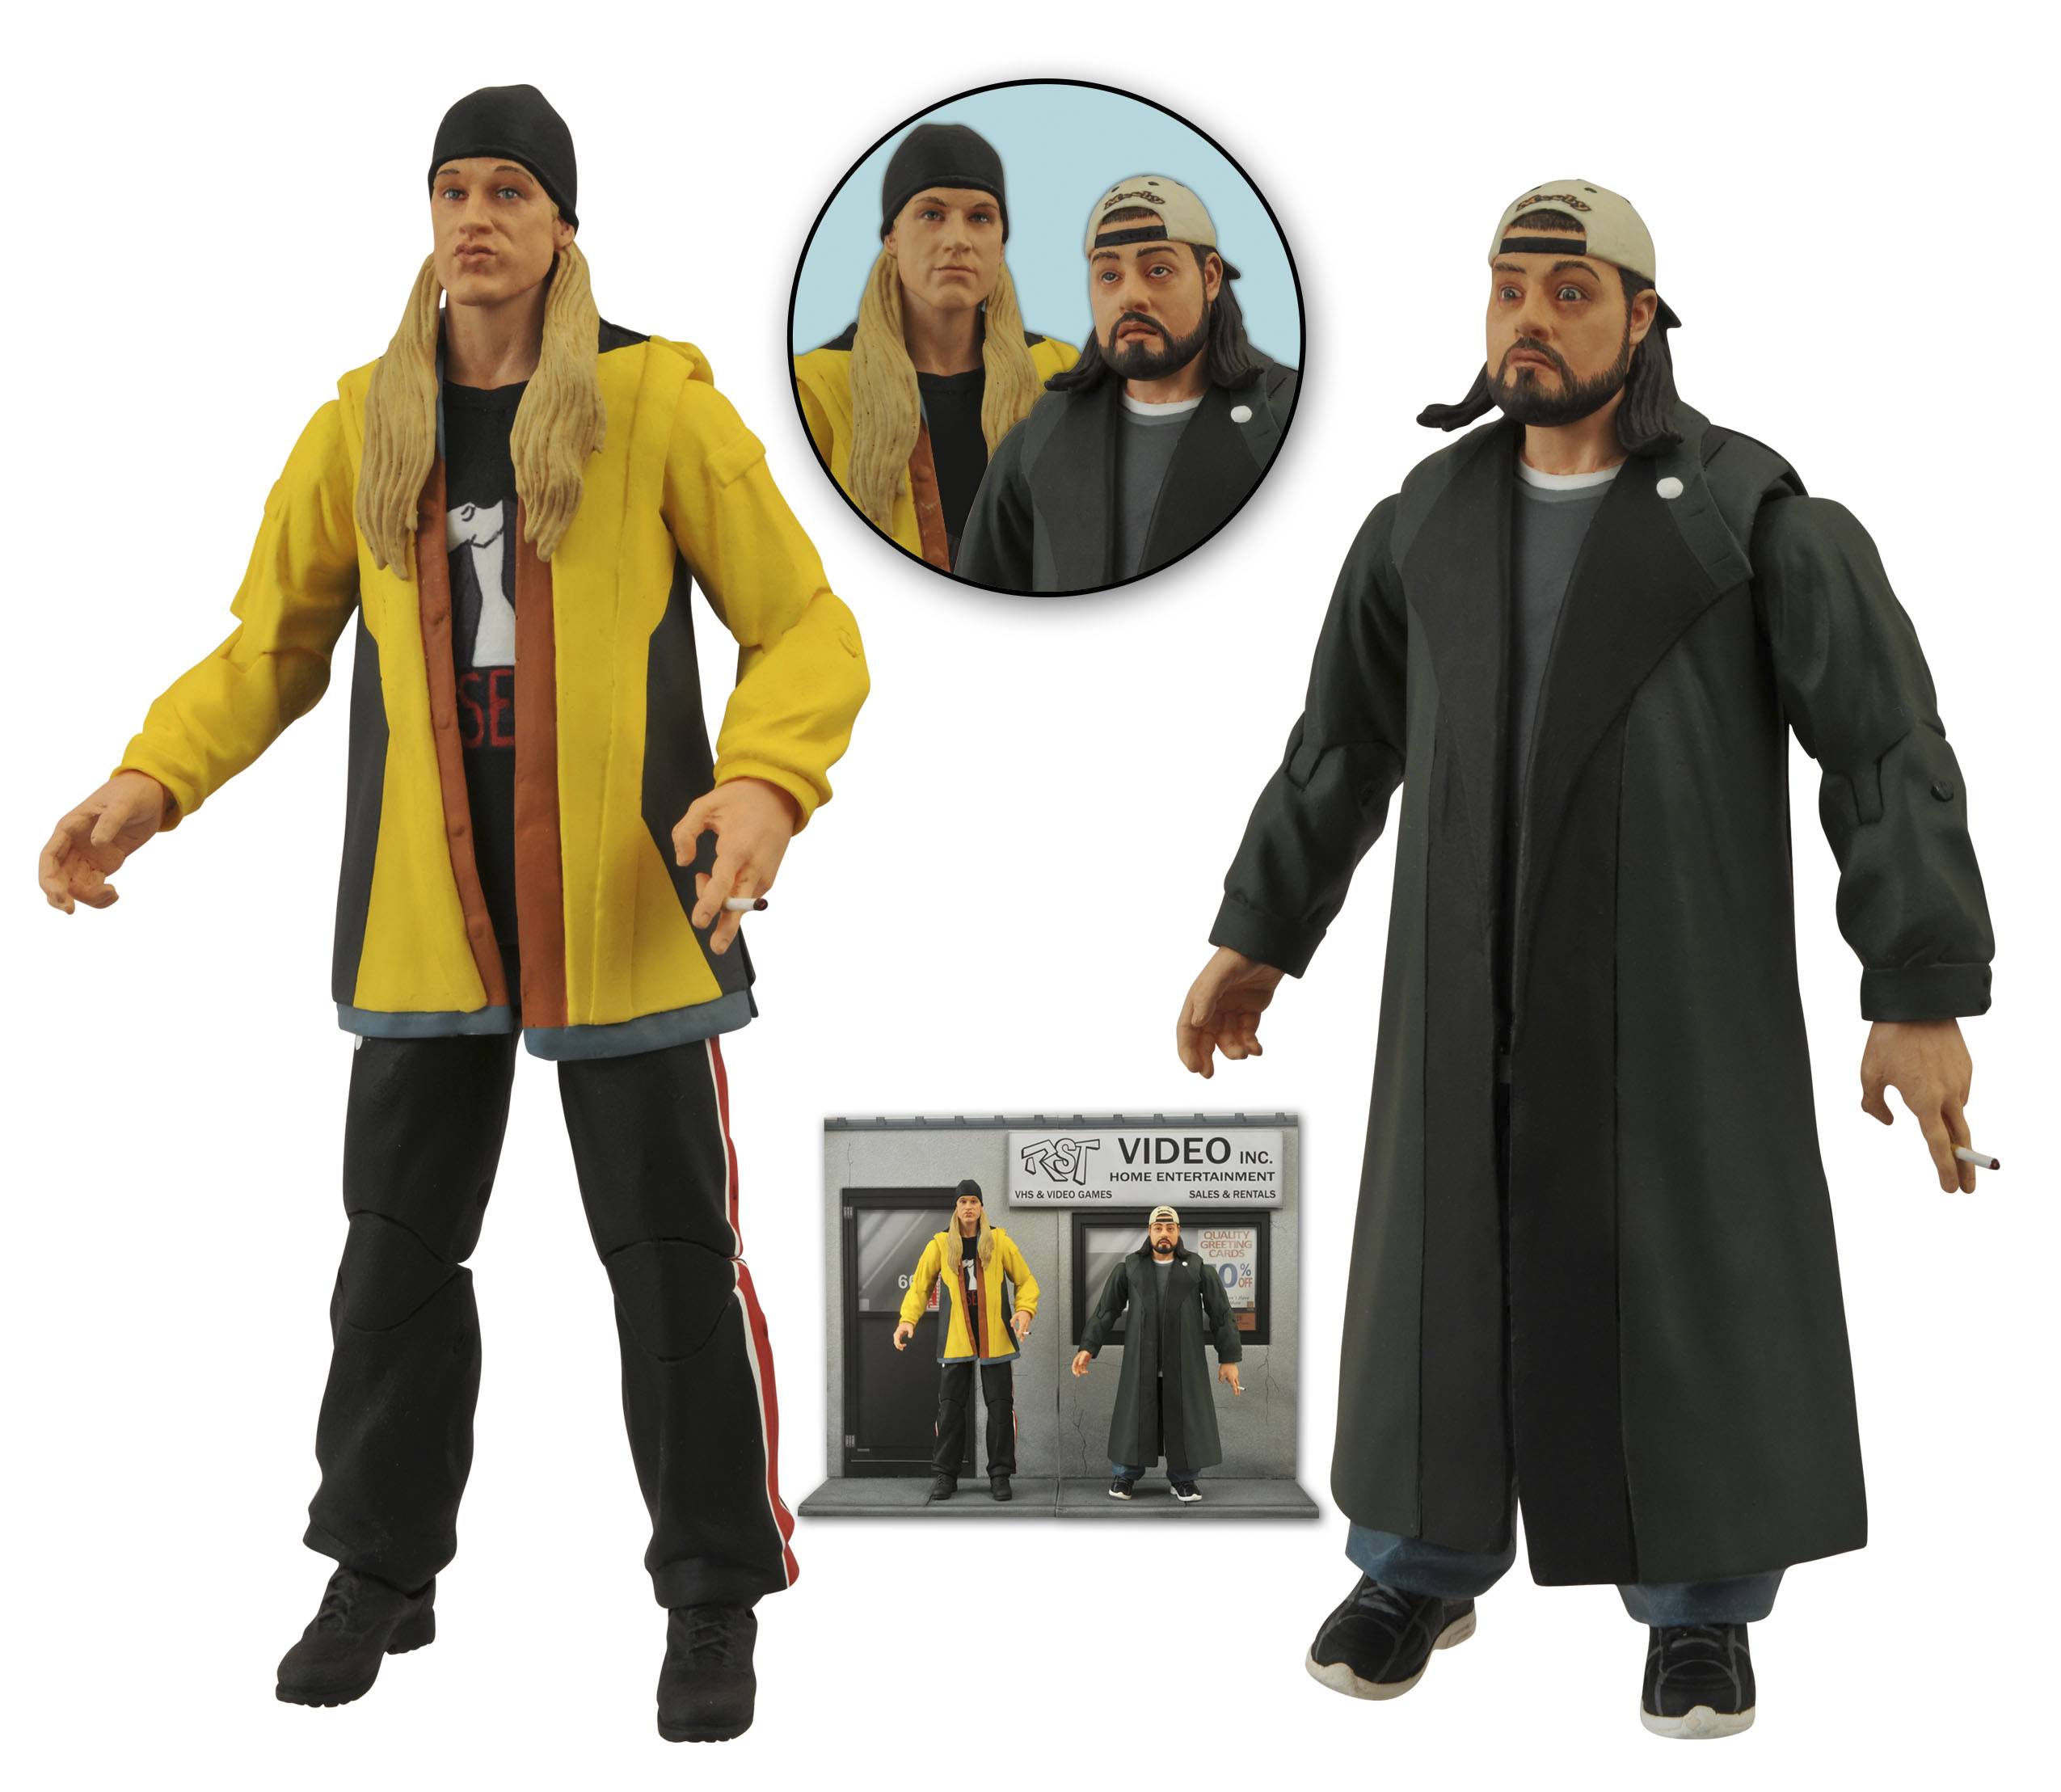 Jay & Silent Bob Action Figure by Old Glory Jay 